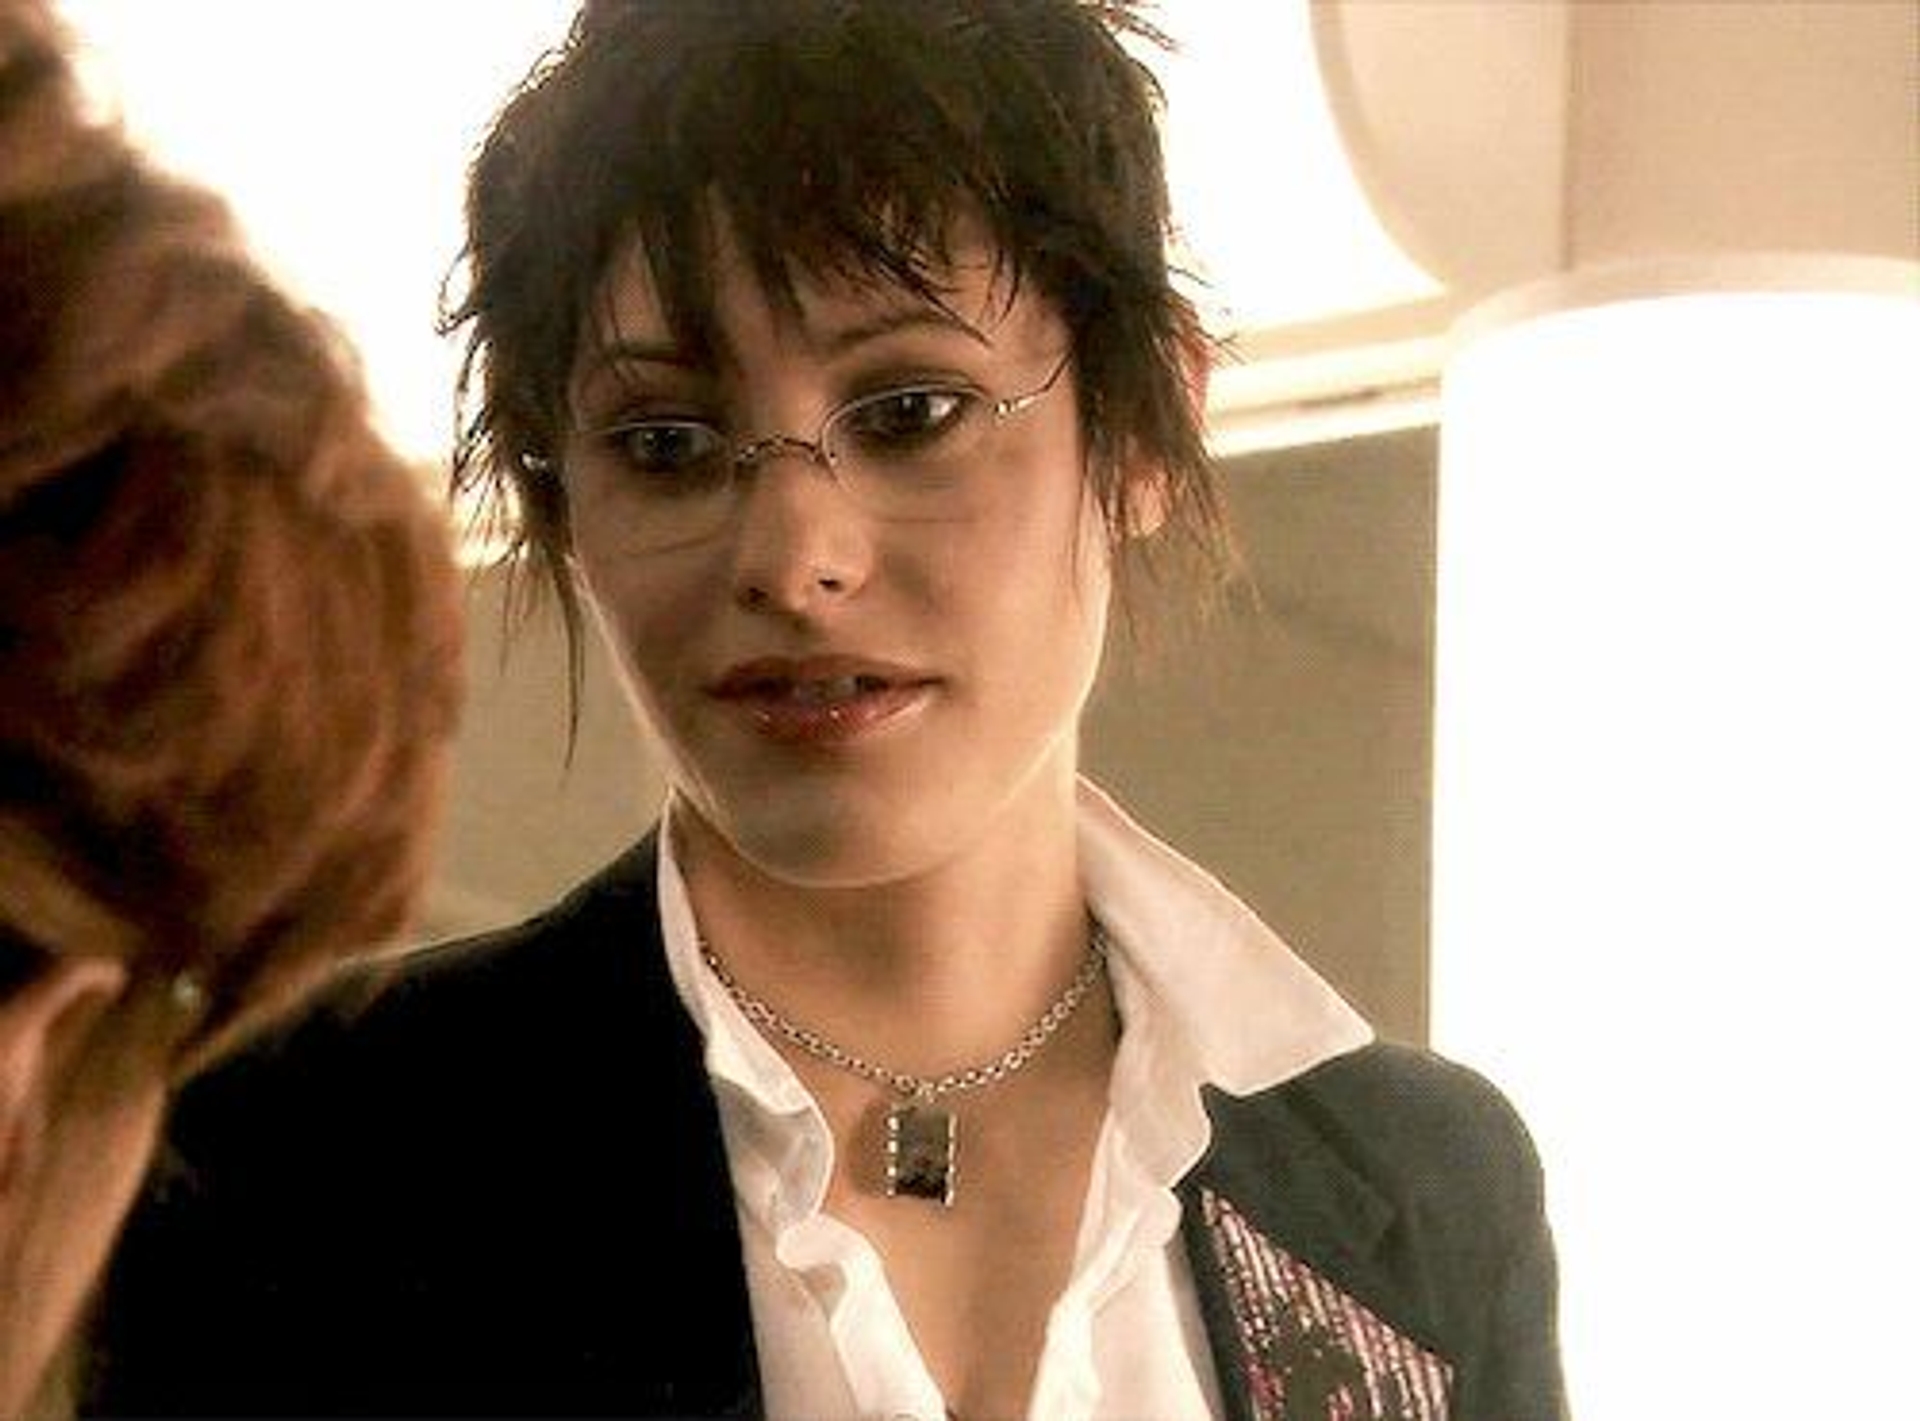 Shane McCutcheon in The L Word (2004-2009), Photo courtesy: @rvndyboggs on Pinterest
